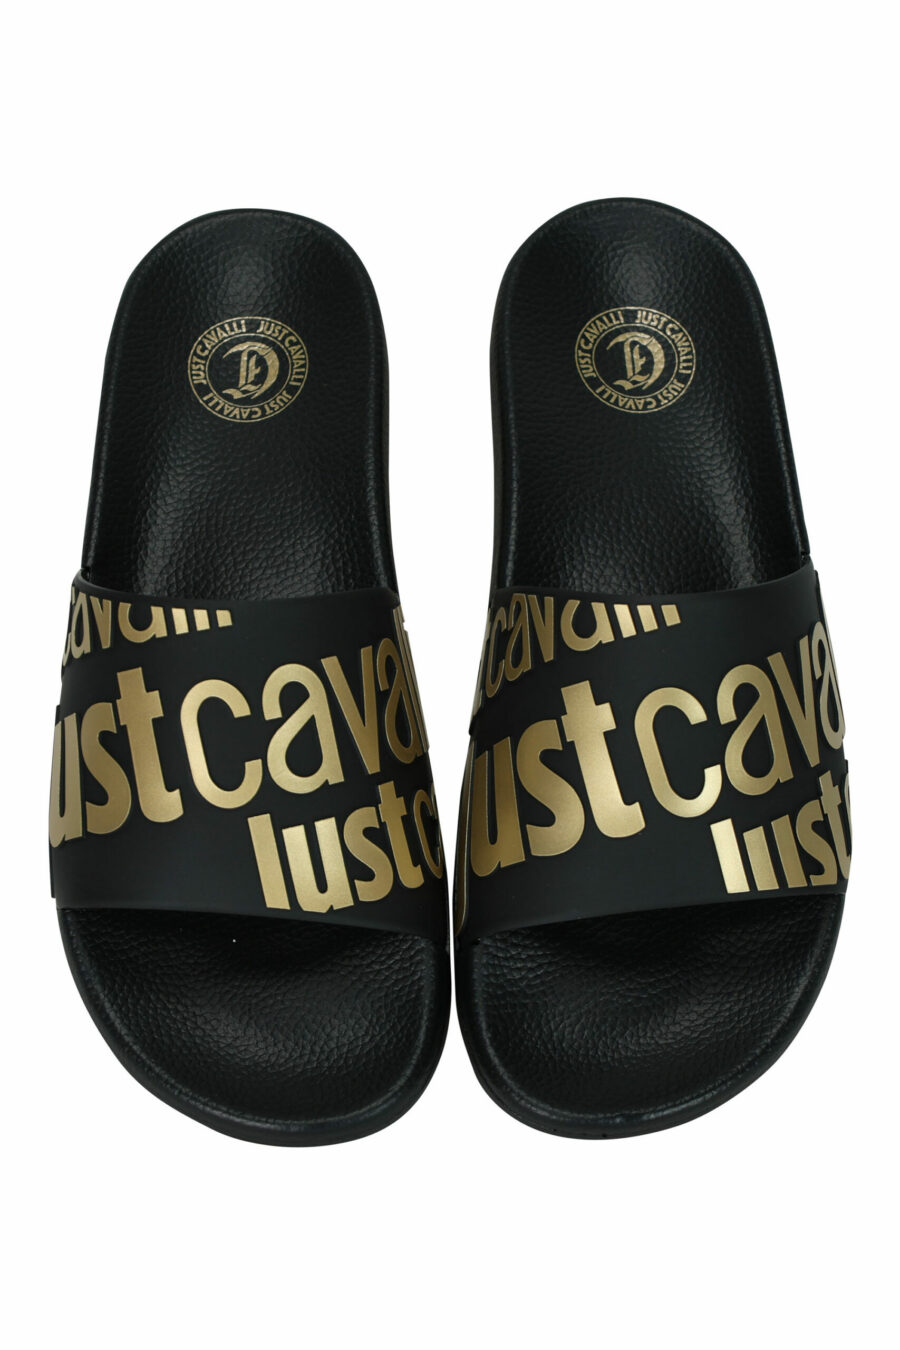 Black flip flops with gold "all over logo just cavalli" maxilogo - 8052672697158 3 scaled